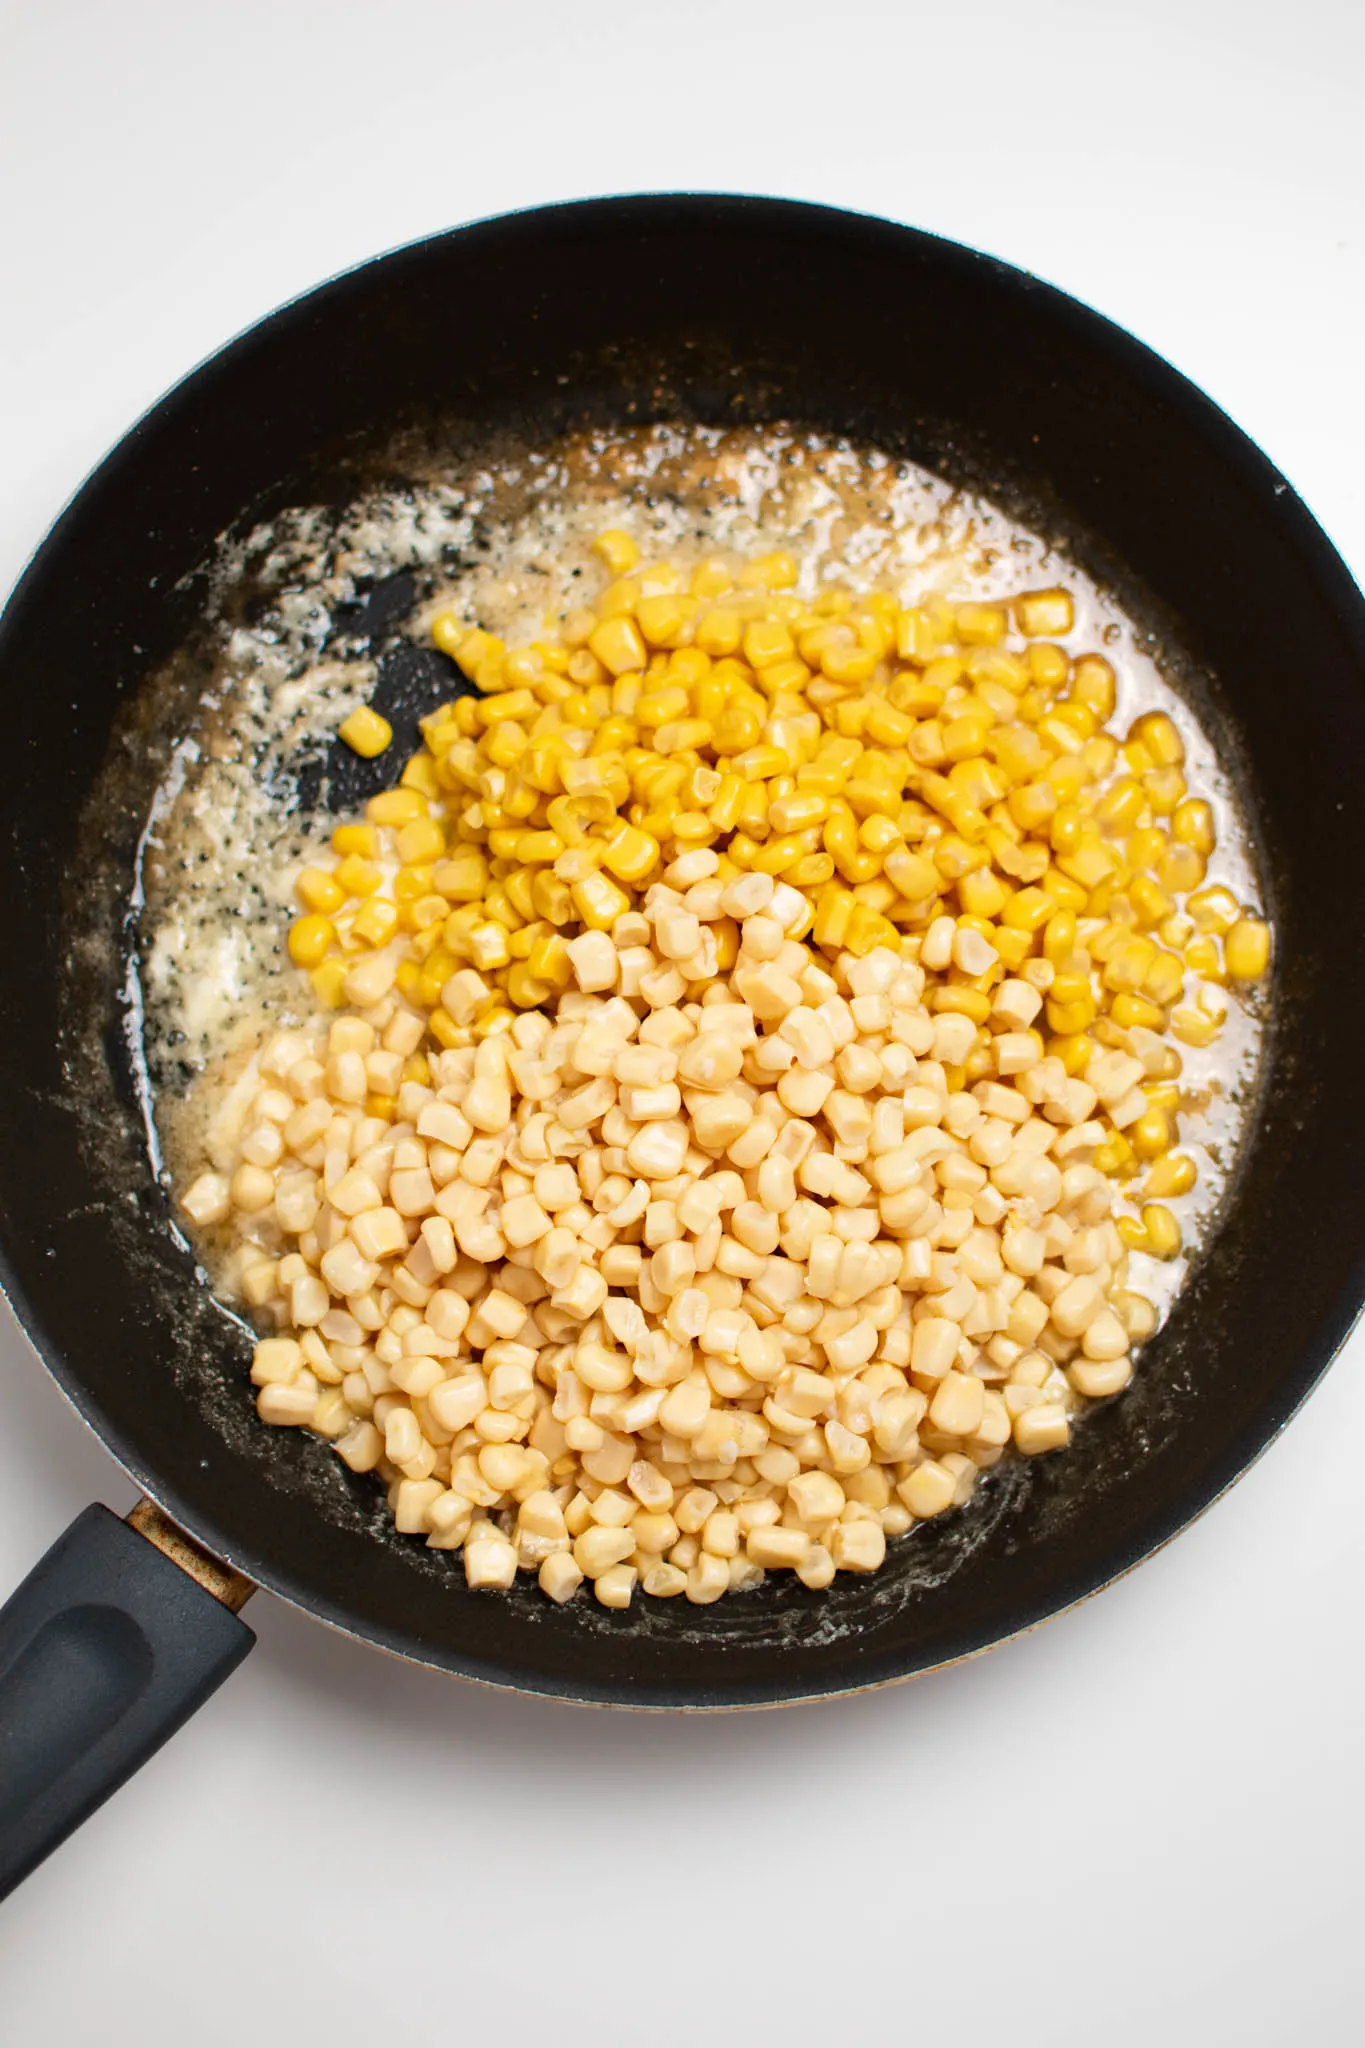 Piles of yellow and white corn kernels in black frying pan.